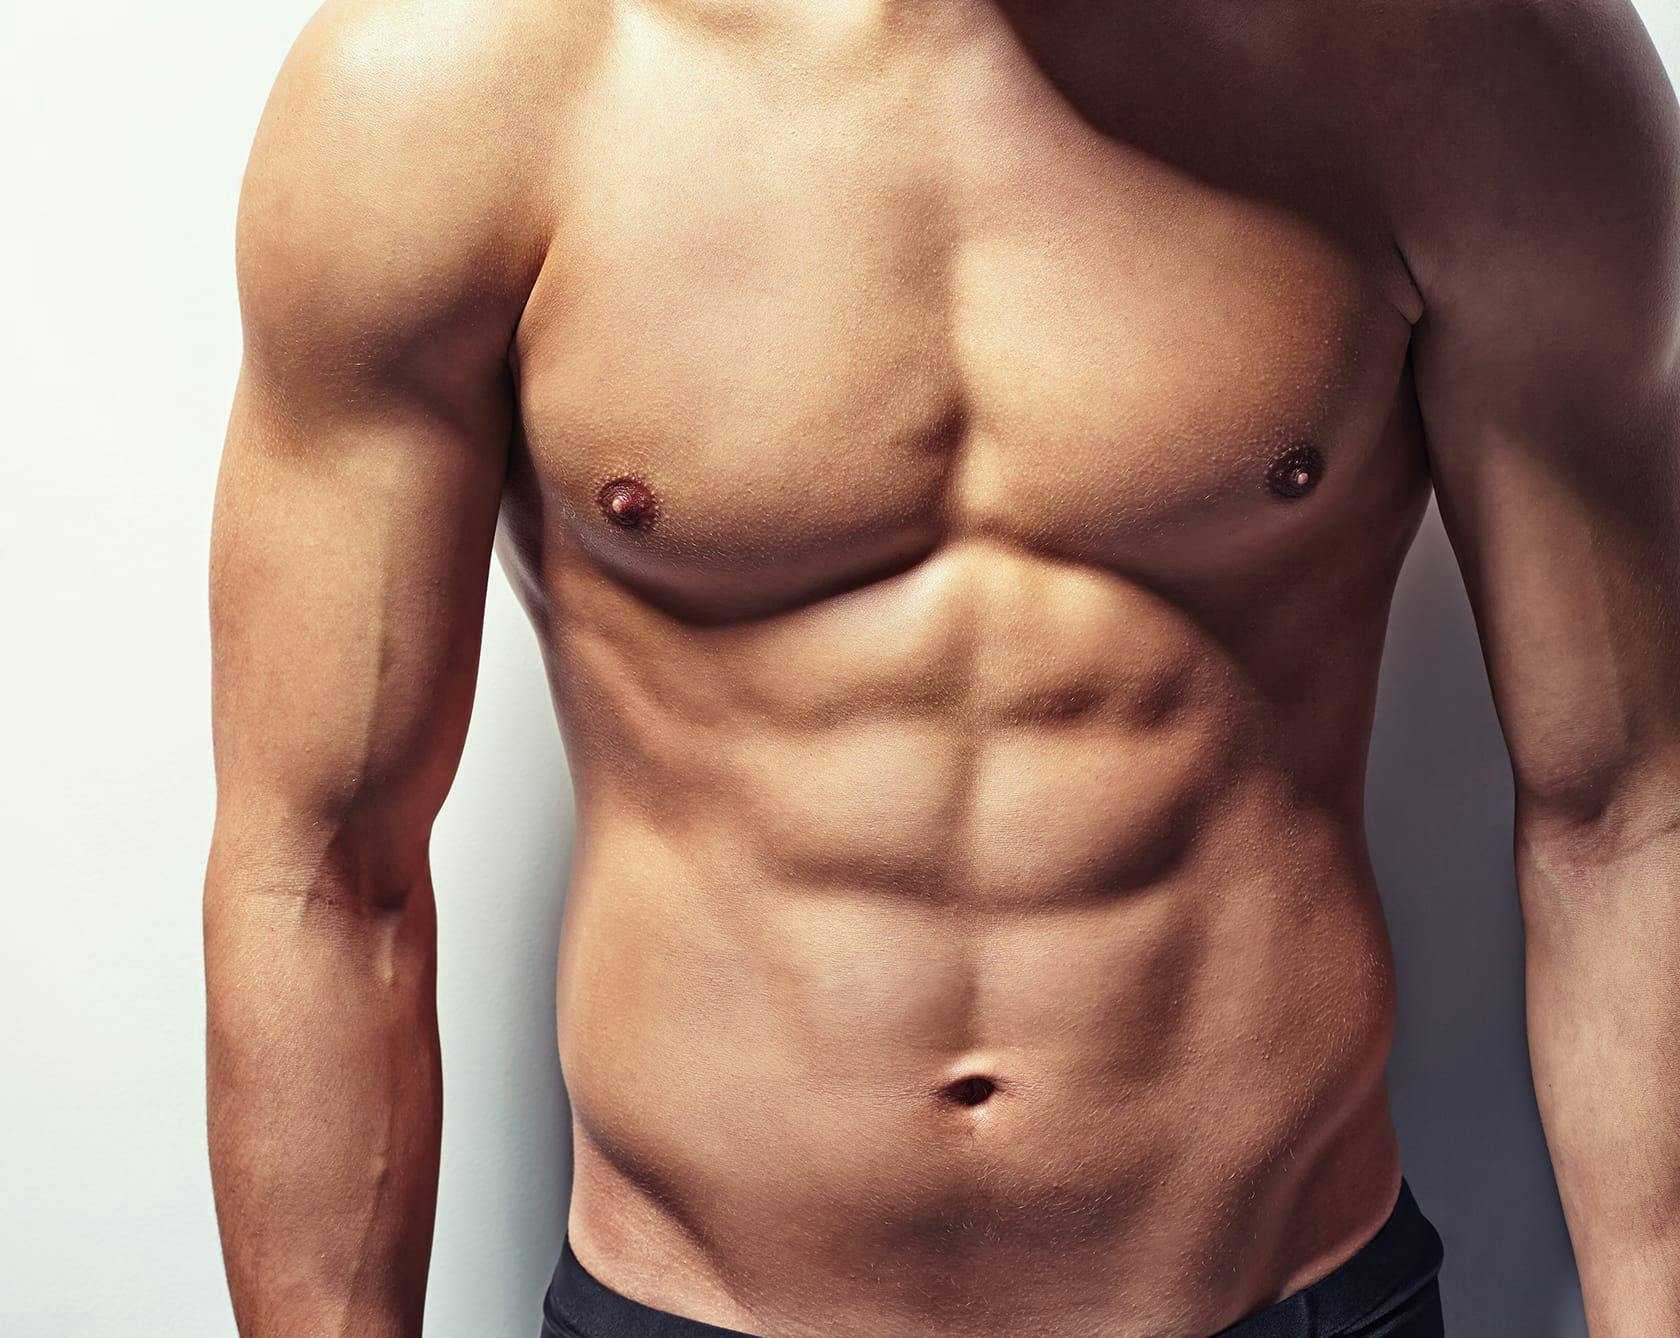 an image of a shirtless man's stomach